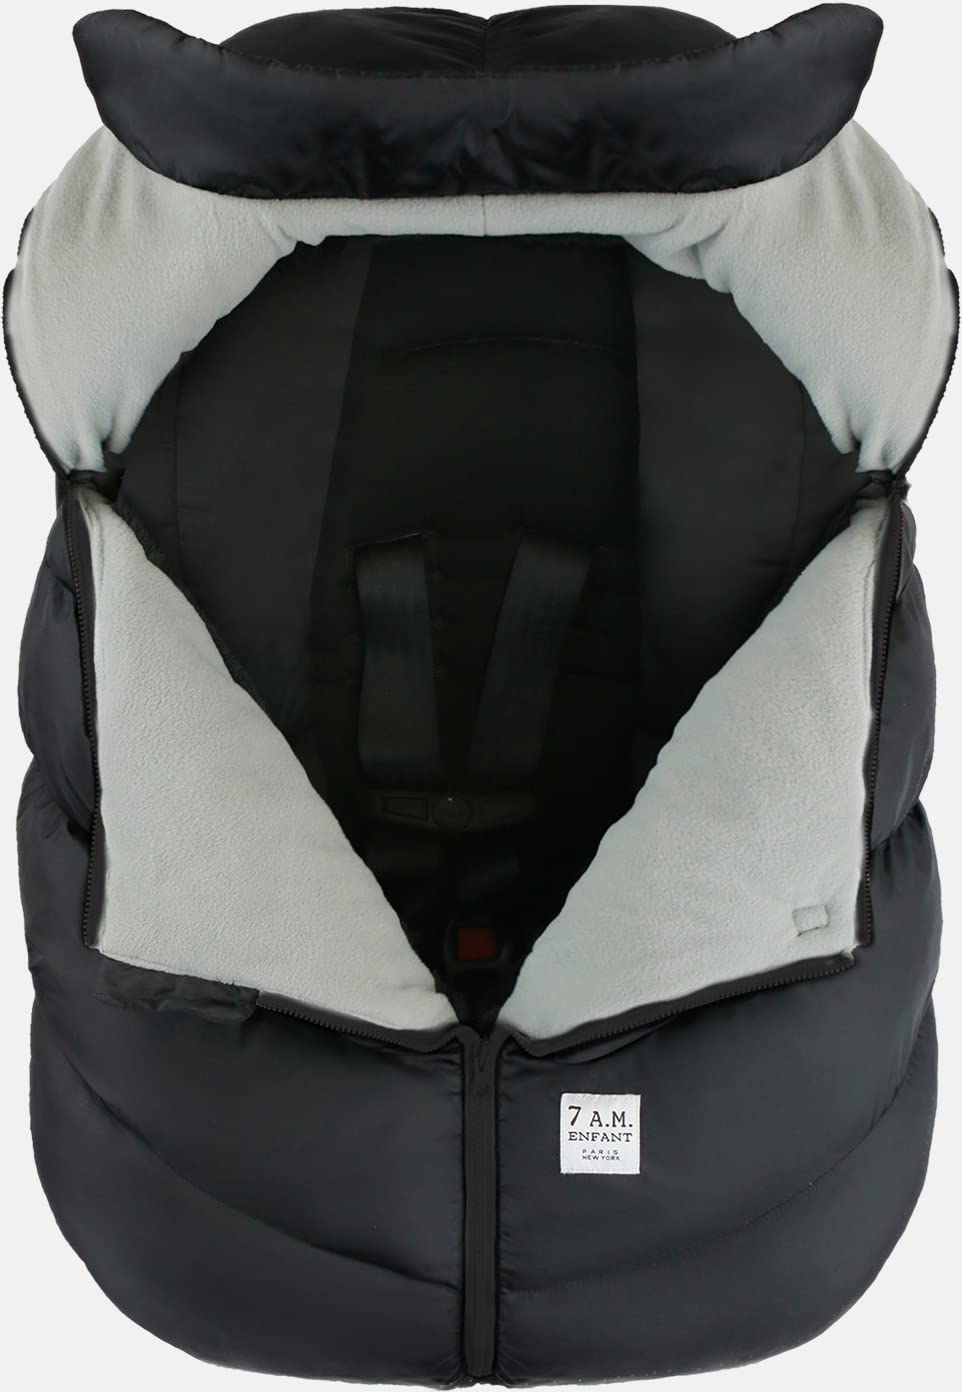 7AM Enfant Car Seat Covers - Cocoon Baby Cover for Boys & Girls, Rain & Snow Repellent, Breathable Windproof, Center Zipper, Universal Fit for Infant Car Seat (0-12M)